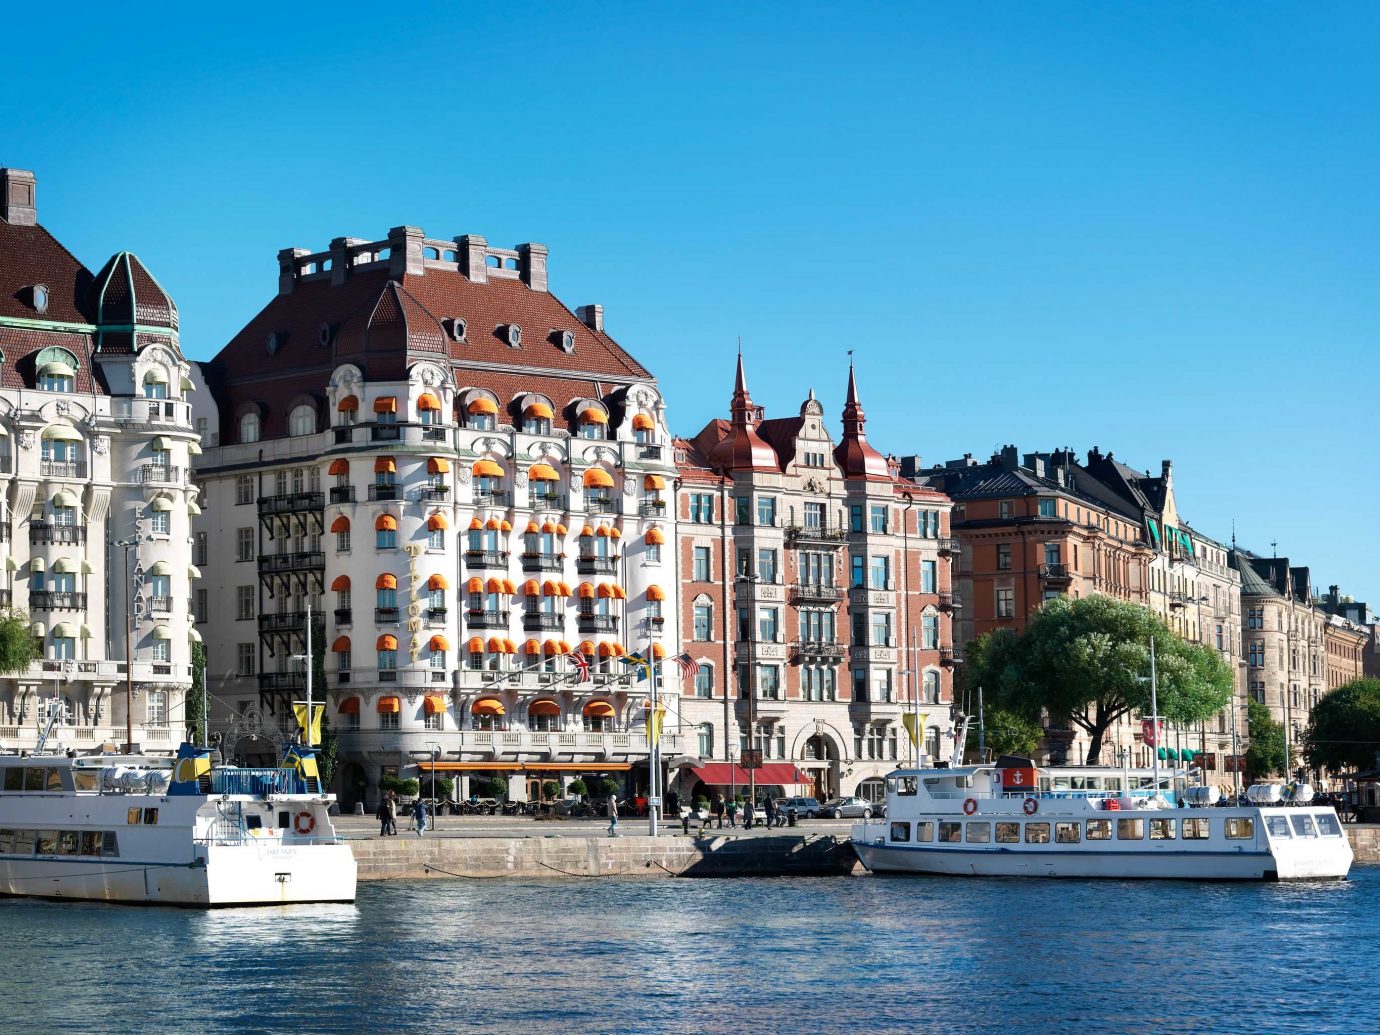 Elegant Exterior Hip Hotels Modern Stockholm Sweden water outdoor sky Boat building landmark Town Harbor City scene waterway cityscape vehicle Canal tourism vacation River day